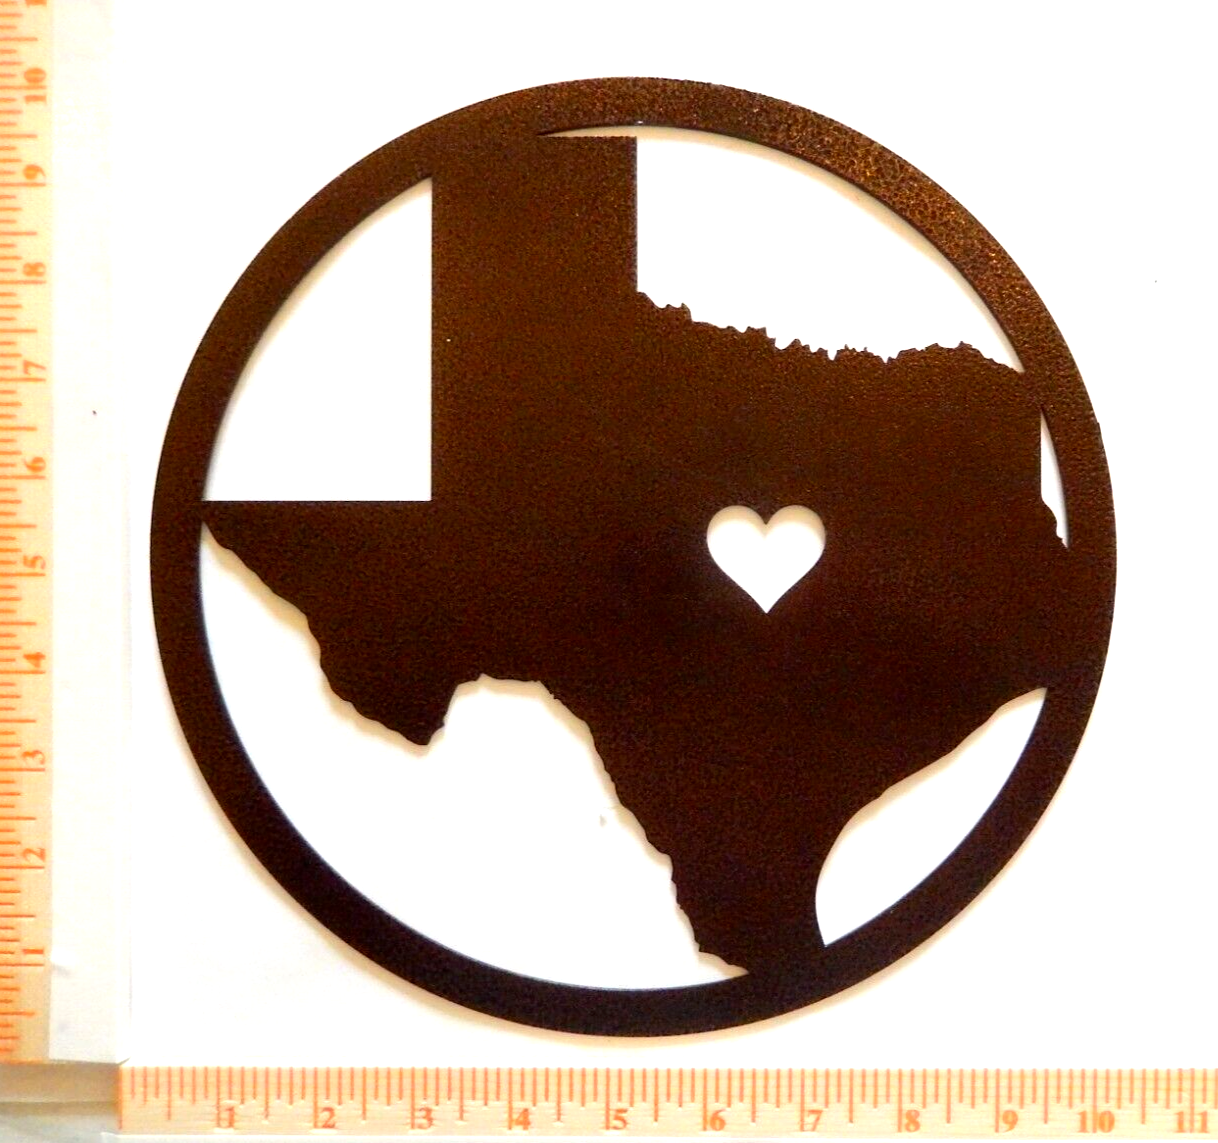 "NEW" STATE OF TEXAS WITH HEART" METAL WALL ART 14ga. 10"x10"